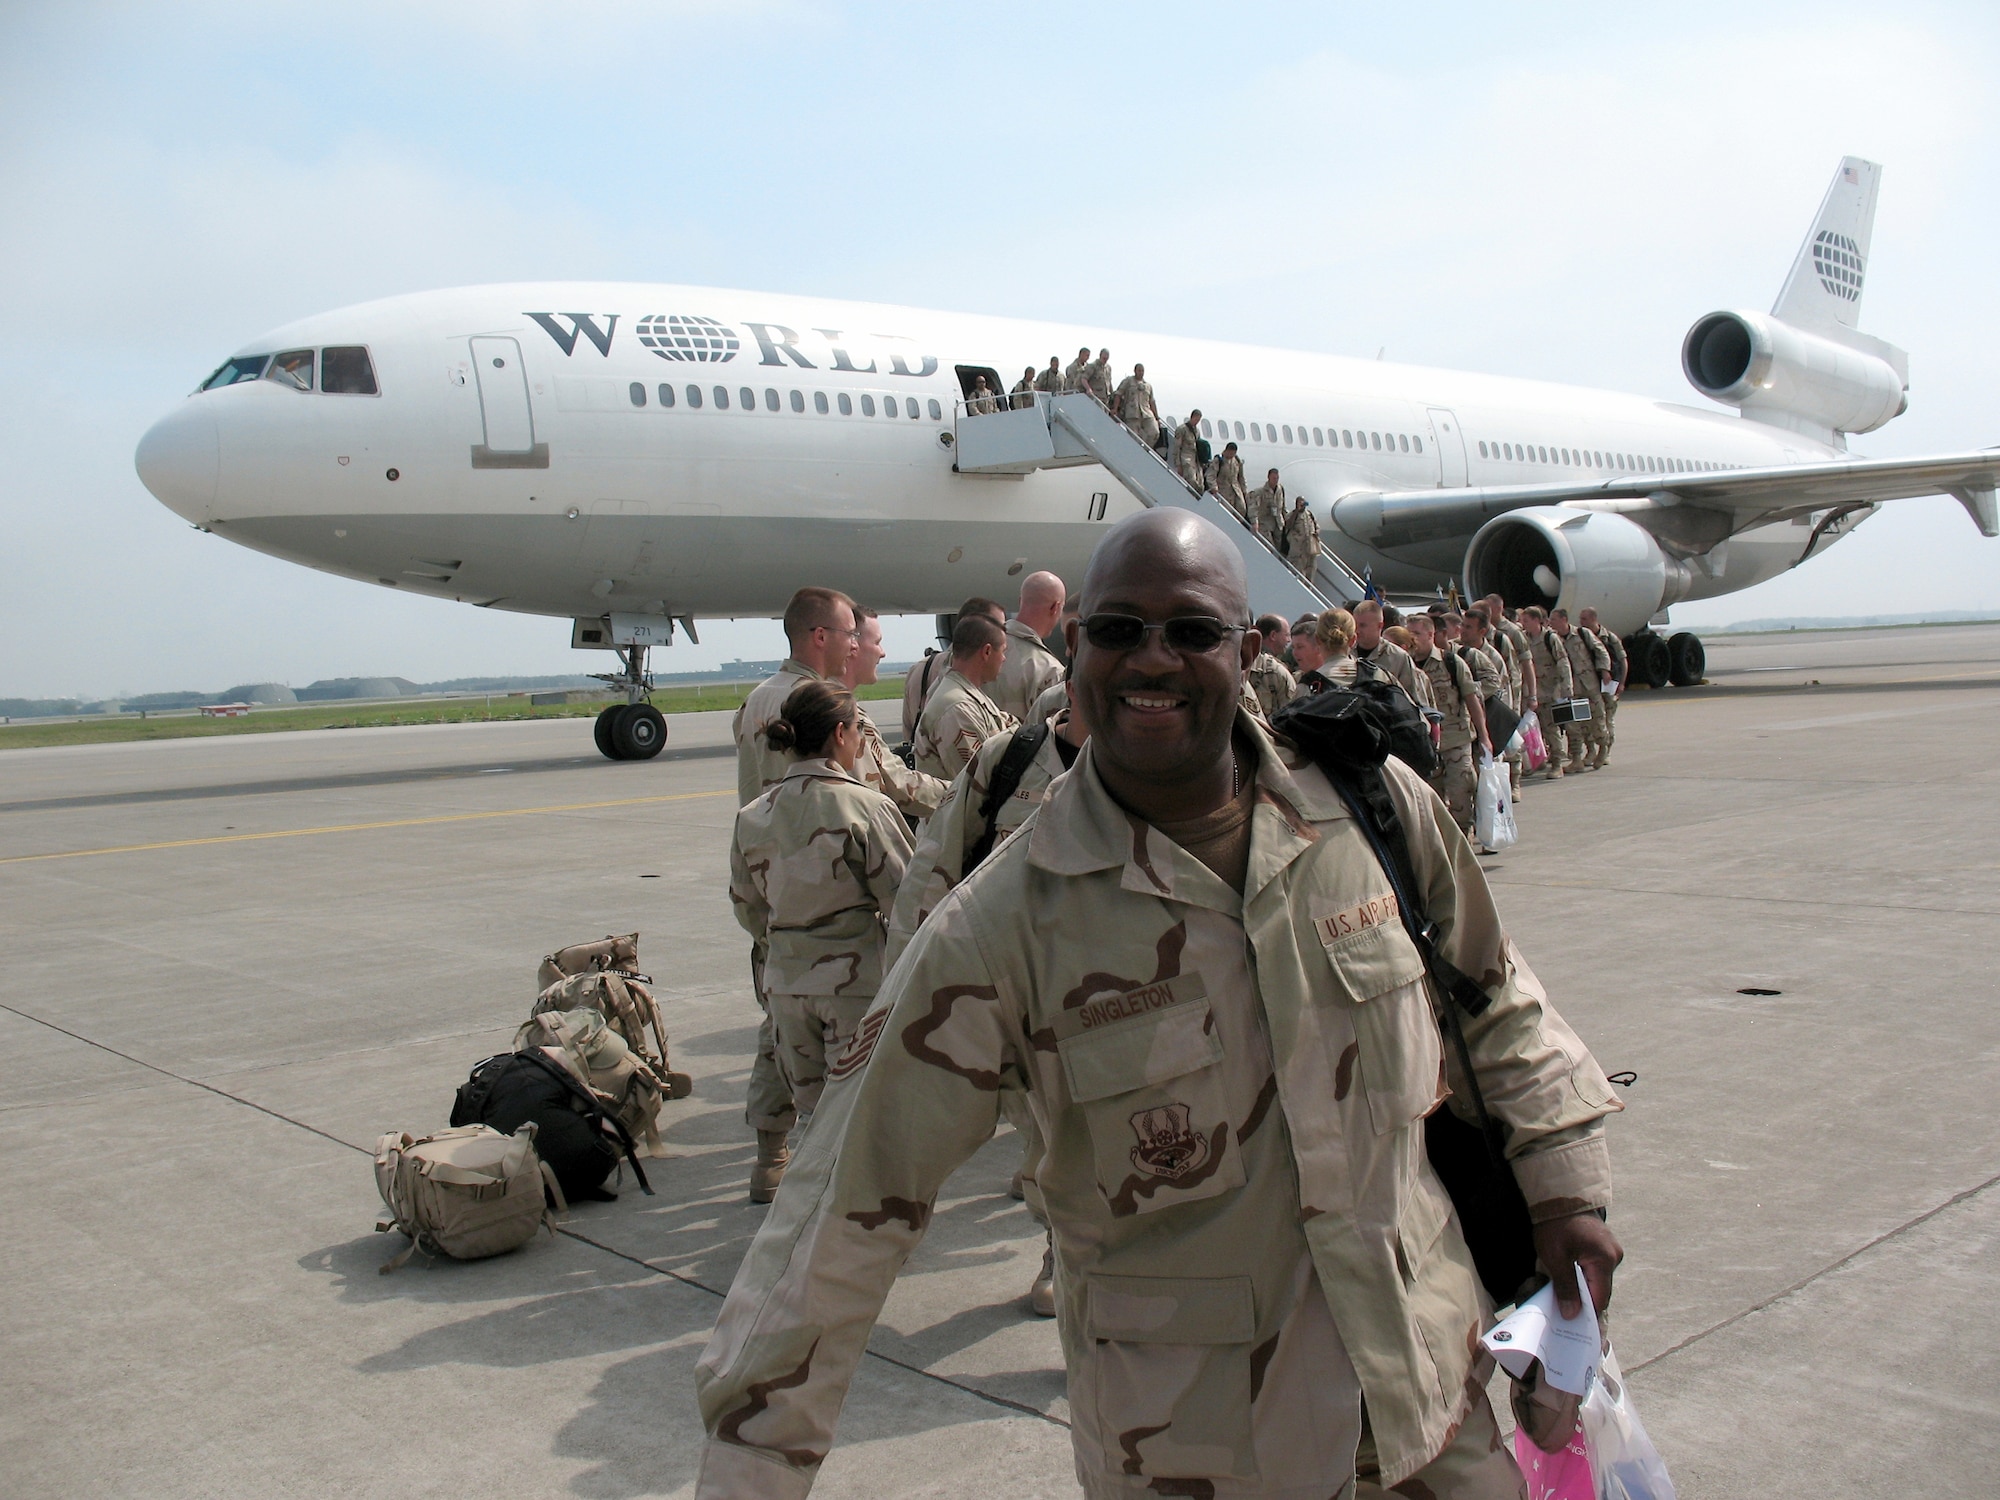 MISAWA AIR BASE, Japan -- Members of the 14th Fighter Squadron return home to Misawa Air Base June 9. For five months the squadron was operating in Iraq, supporting troops on the ground and directly helping the United States win the Global War on Terror. (U.S. Navy photo by Mass Communication Specialist 1st Class Hendrick Simoes)